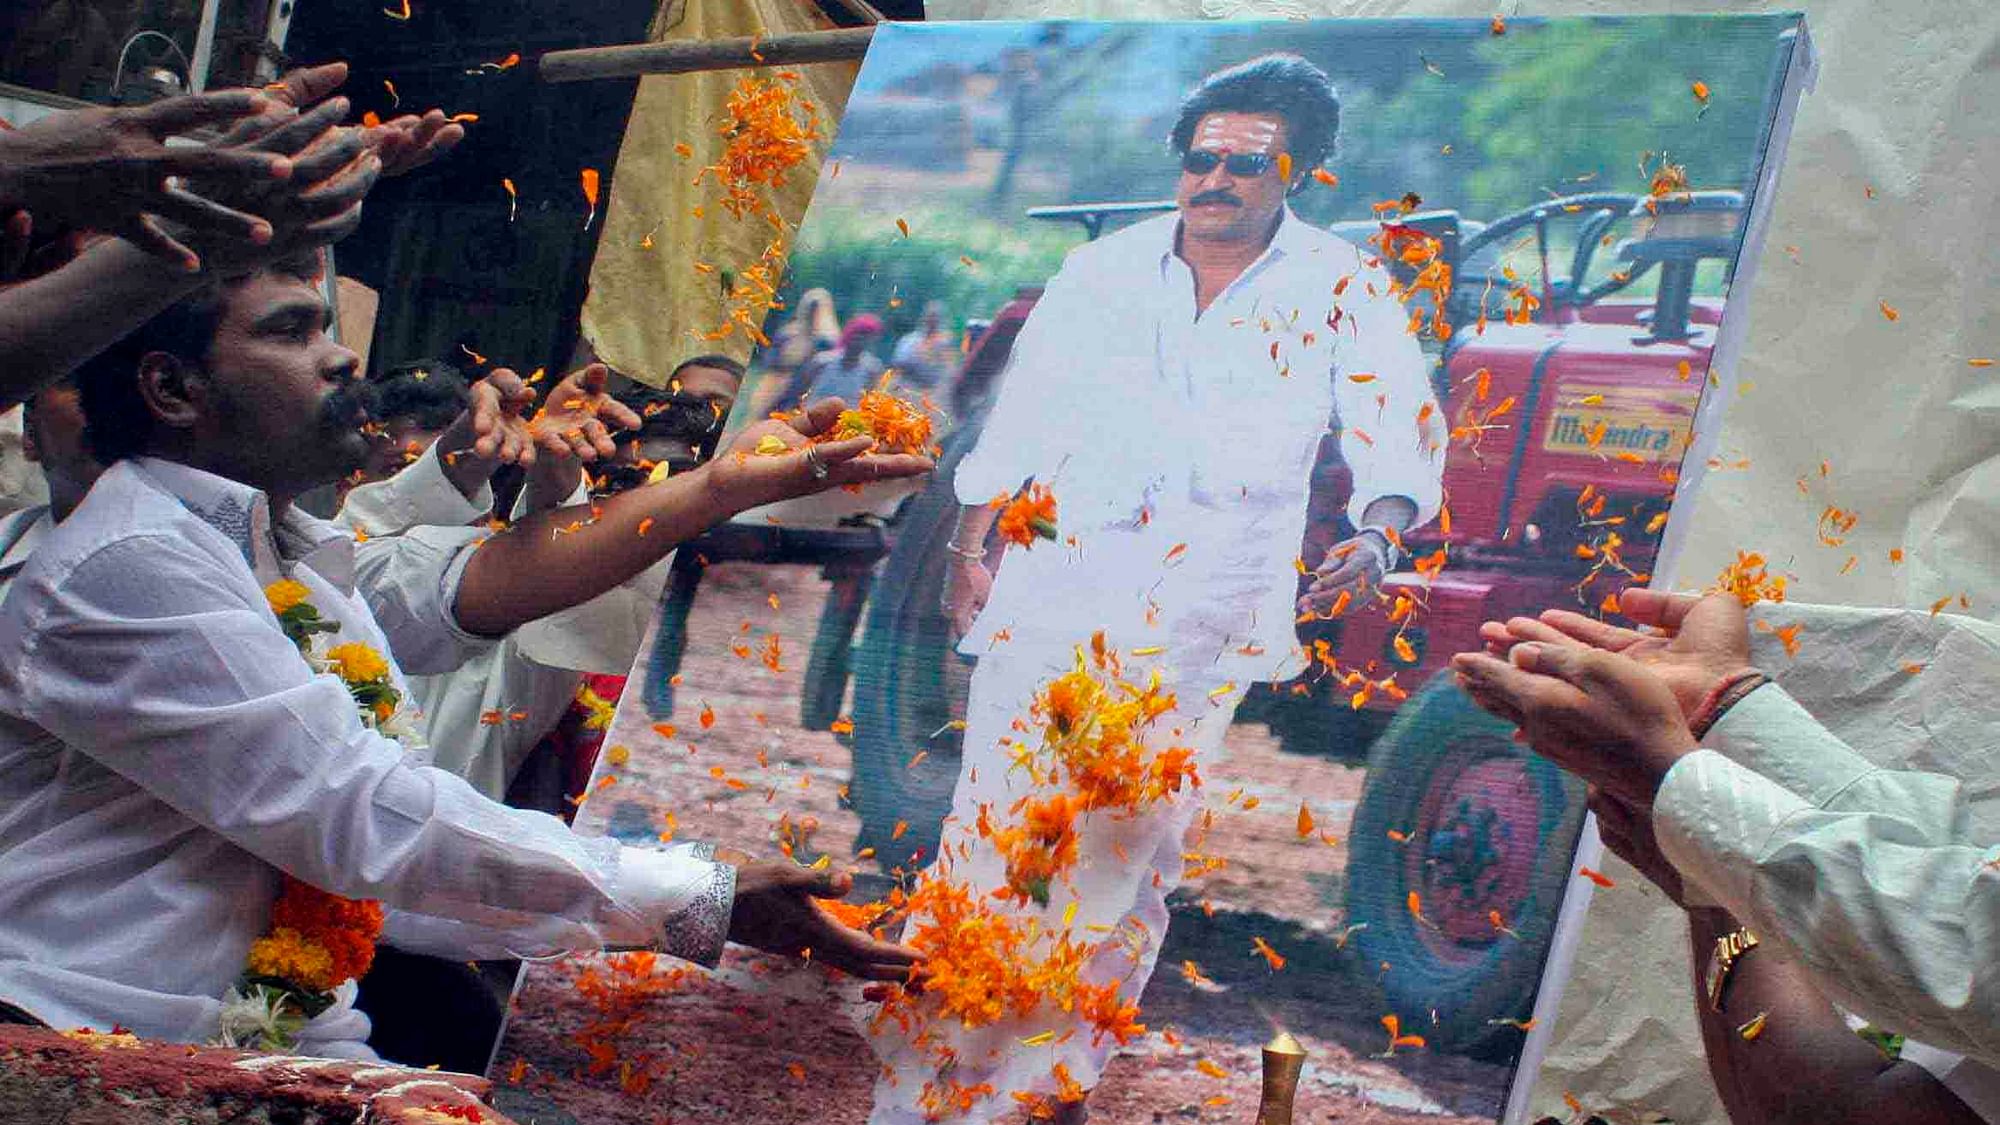 Fans of Rajinikanth throw flowers in front of his portrait (Photo: Reuters)